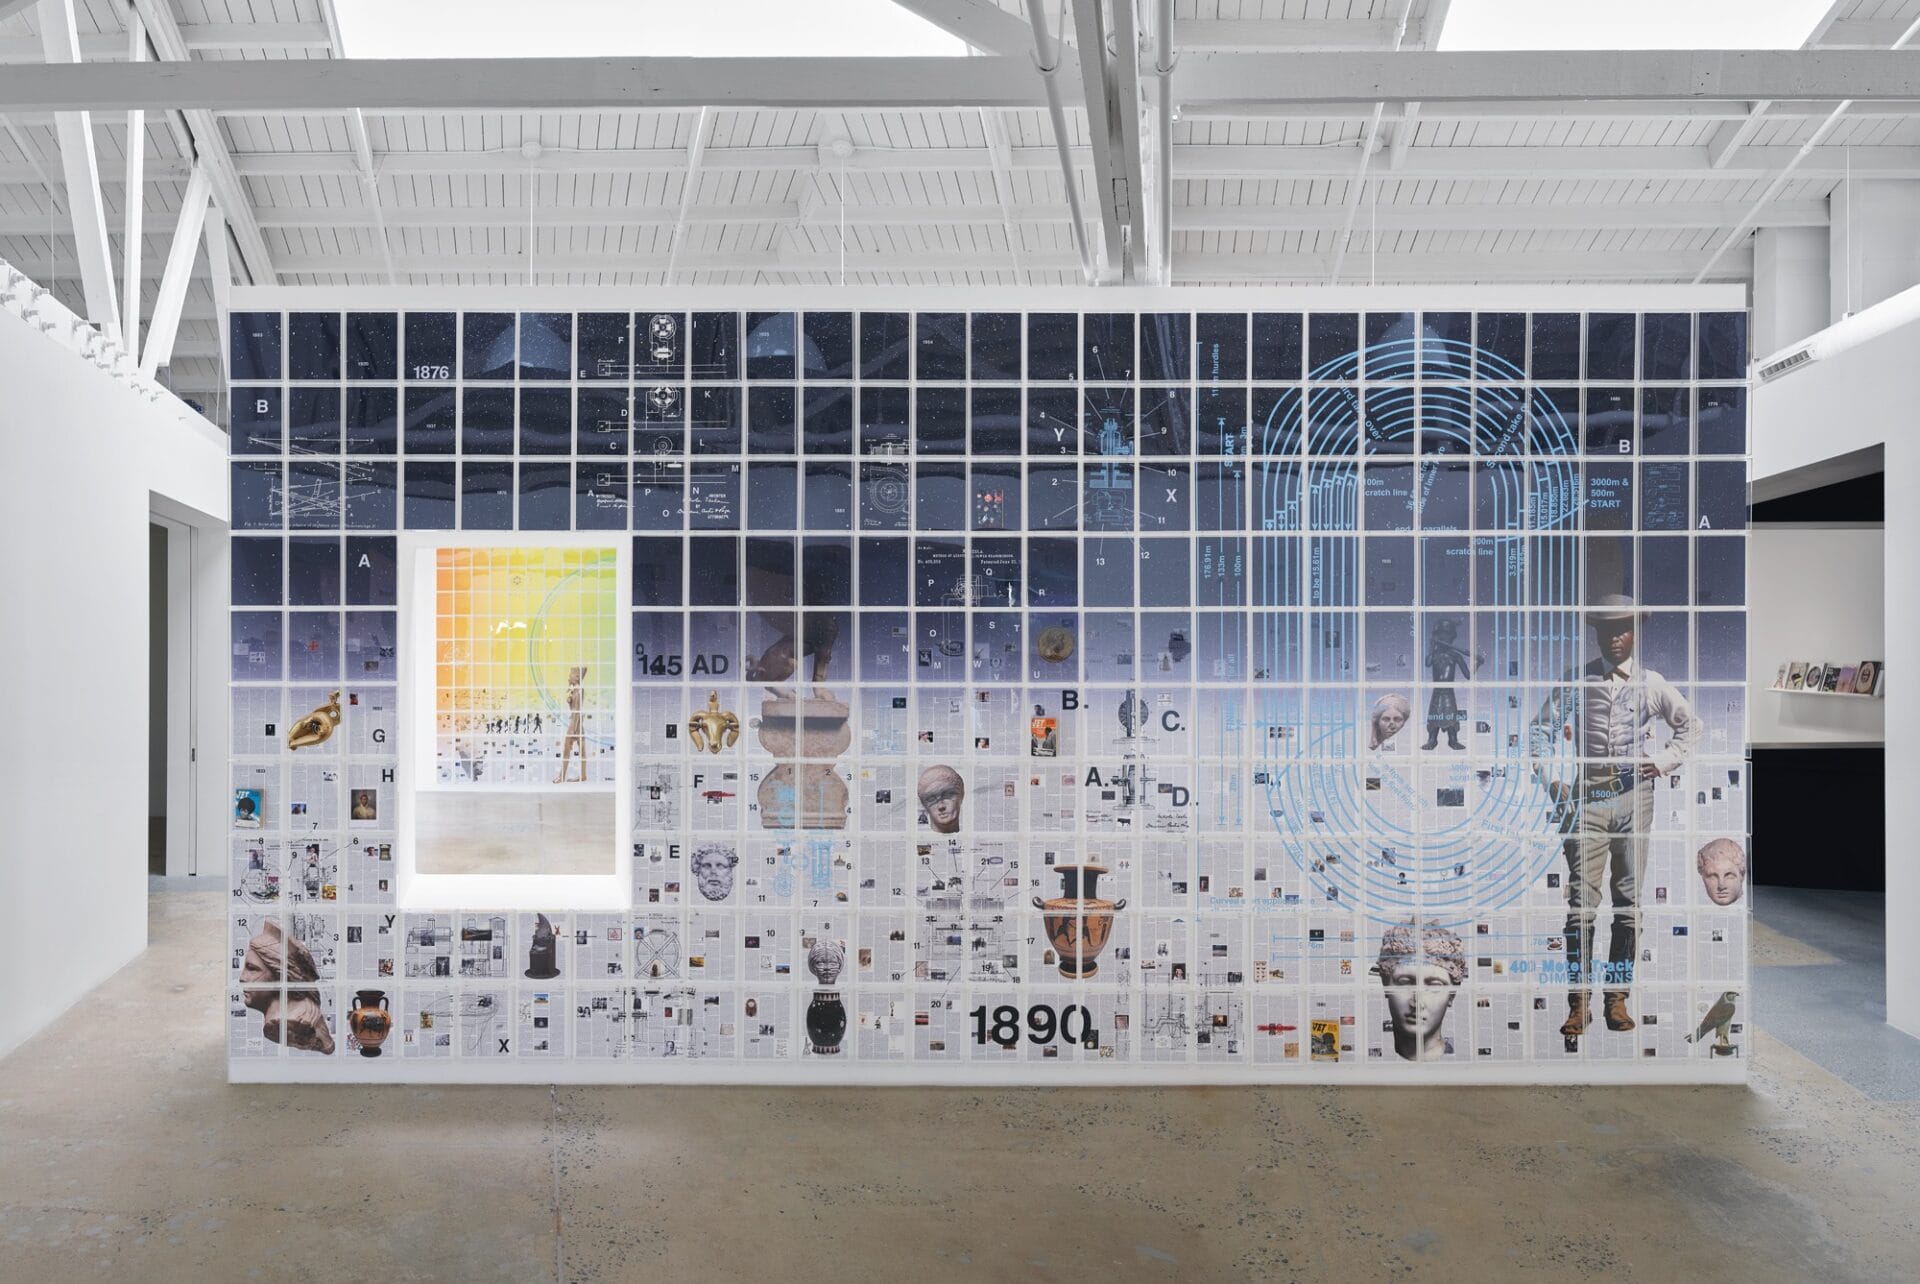 a large installation in a gallery space showing a wall with a window through it to another installation behind. the wall is covered in a grid of rectangles that reveal a sweeping scene with a figure on the right and numerous vases and other elements